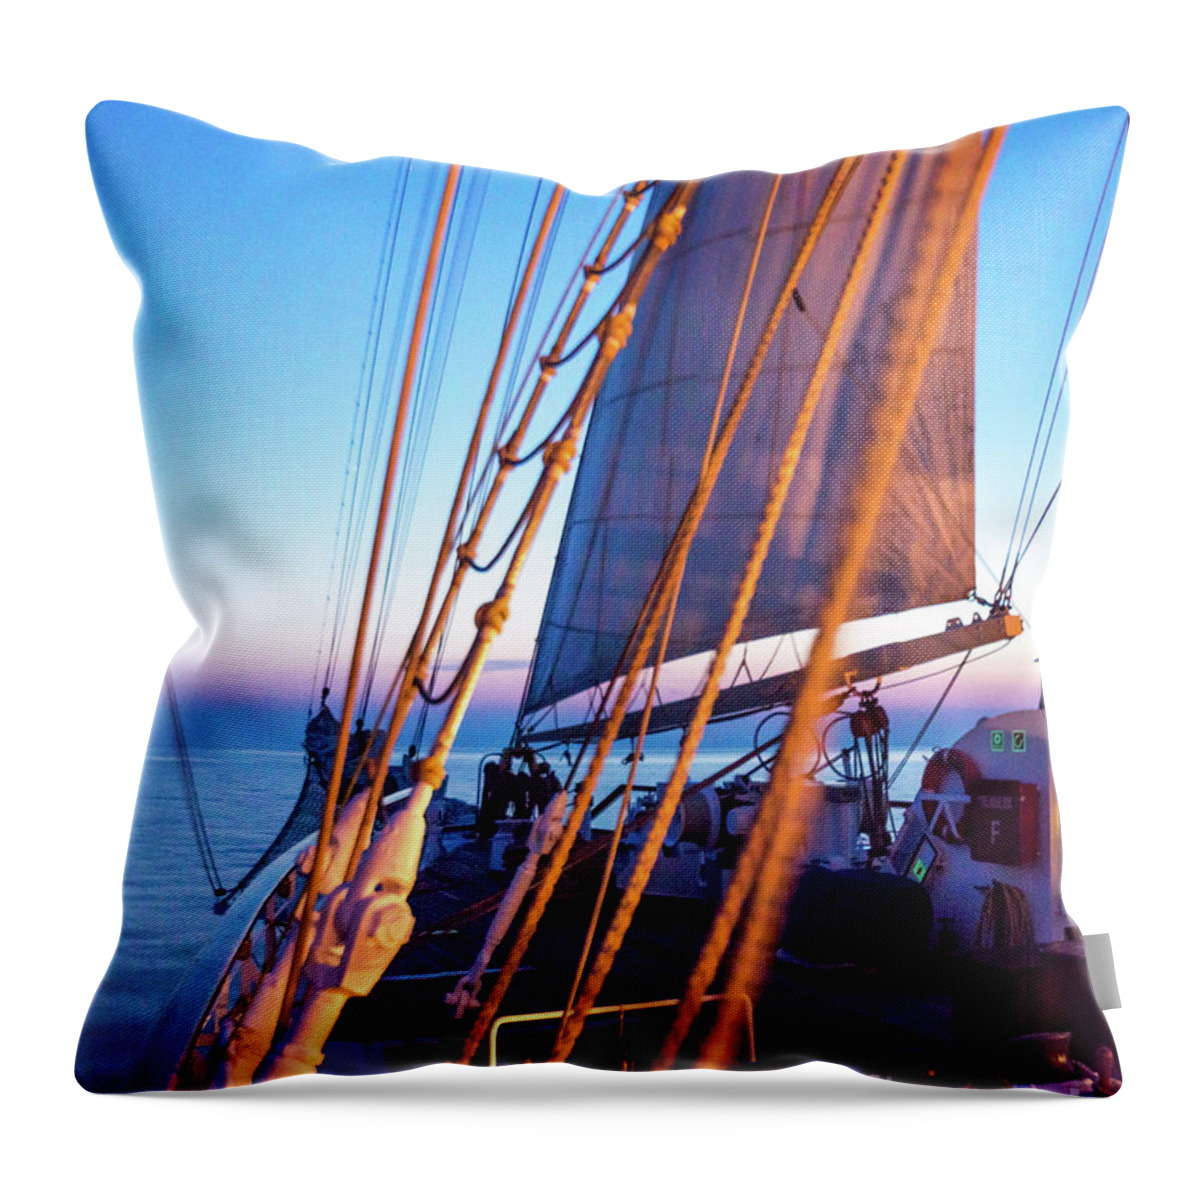 Aegis Throw Pillow featuring the photograph Crusing Into Sunrise by Hannes Cmarits